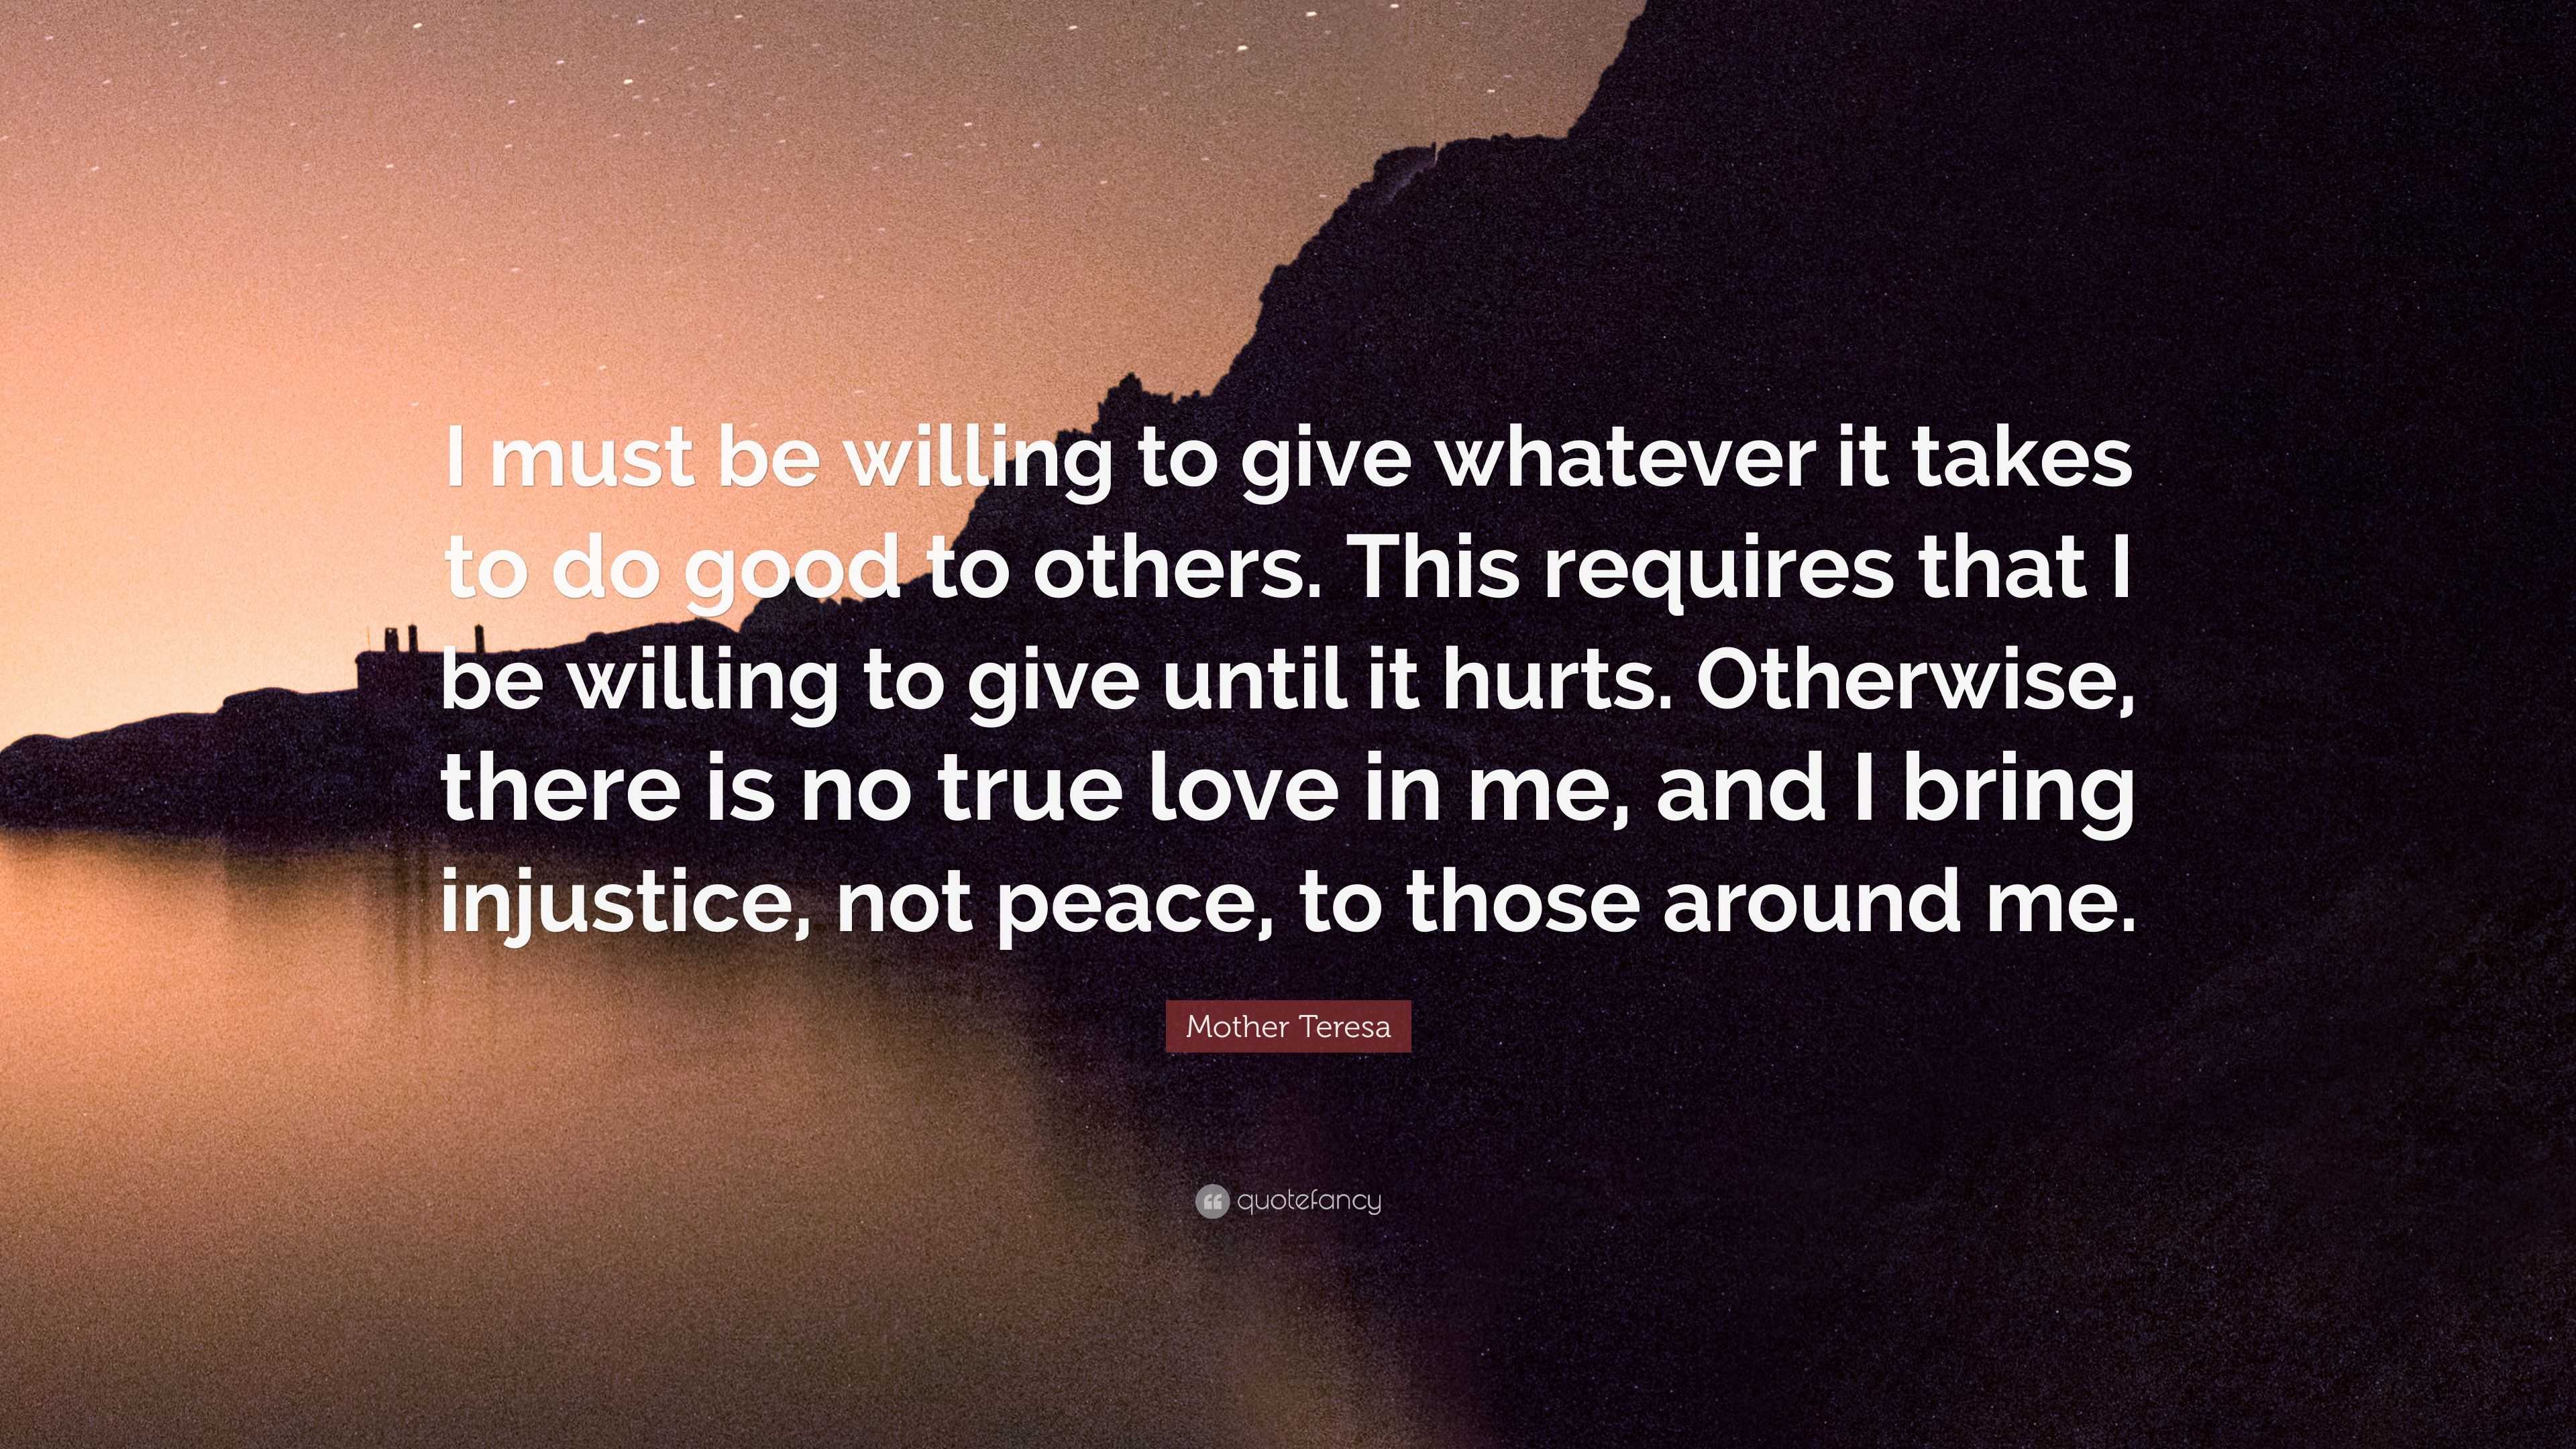 Mother Teresa Quote “I must be willing to give whatever it takes to do